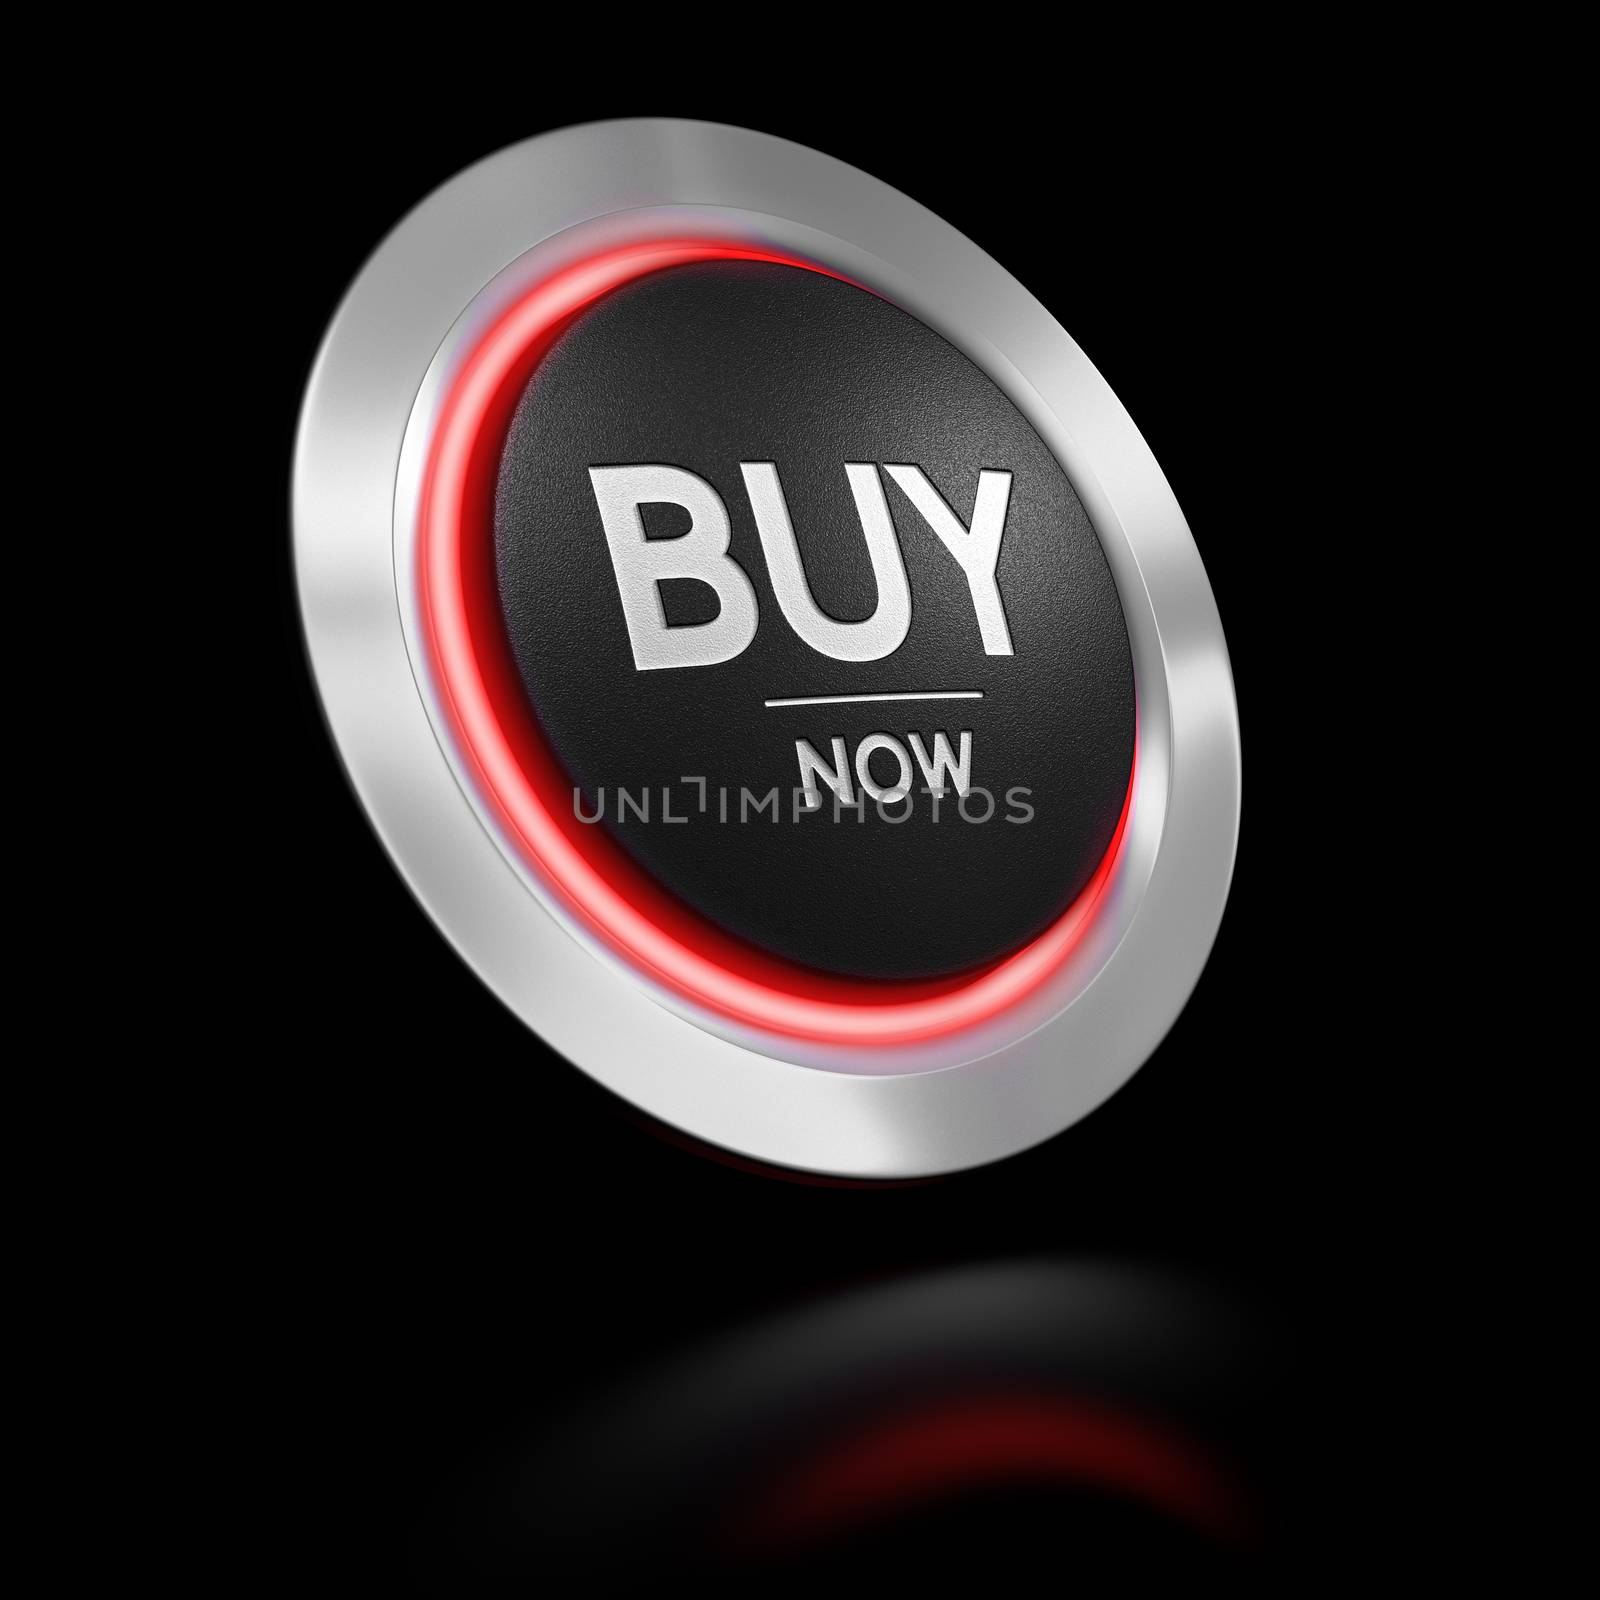 3D illustration of a call to action button with the text buy now. Design element over black background